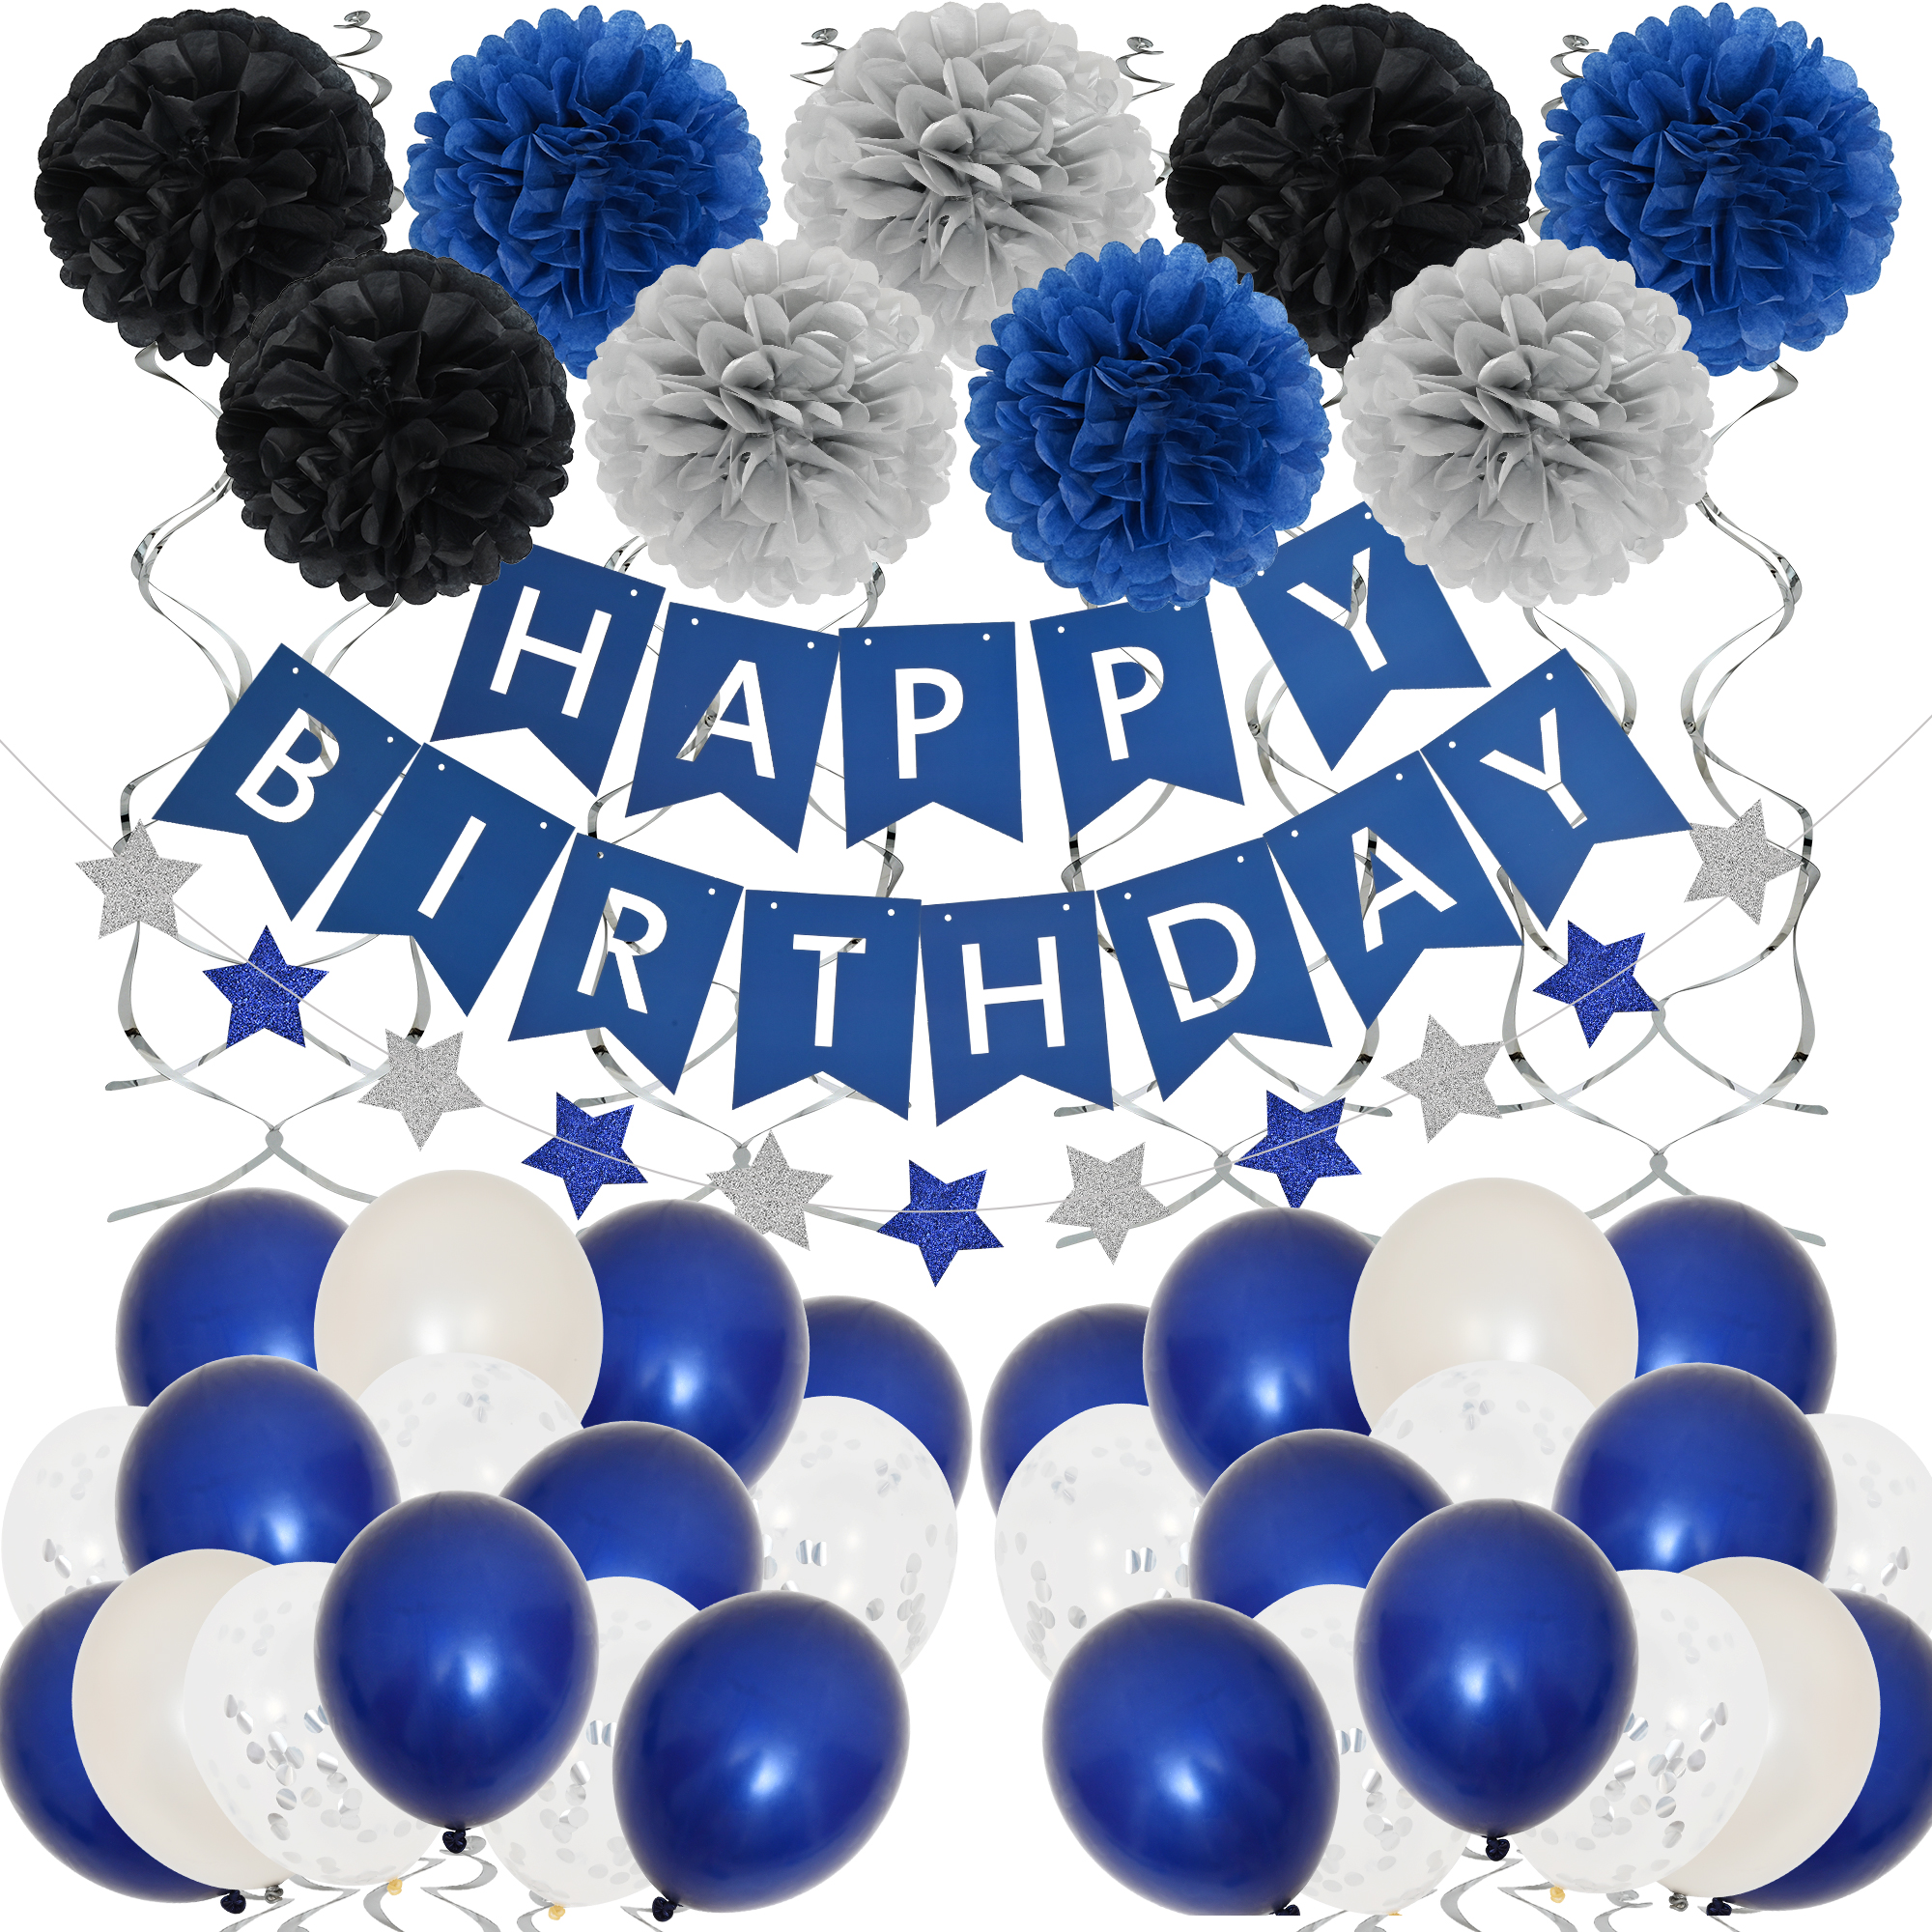 Birthday Party Decoration Silver Blue for Mans Boys, Balloons, Happy Birthday Banner, Fringe Curtain - image 1 of 7